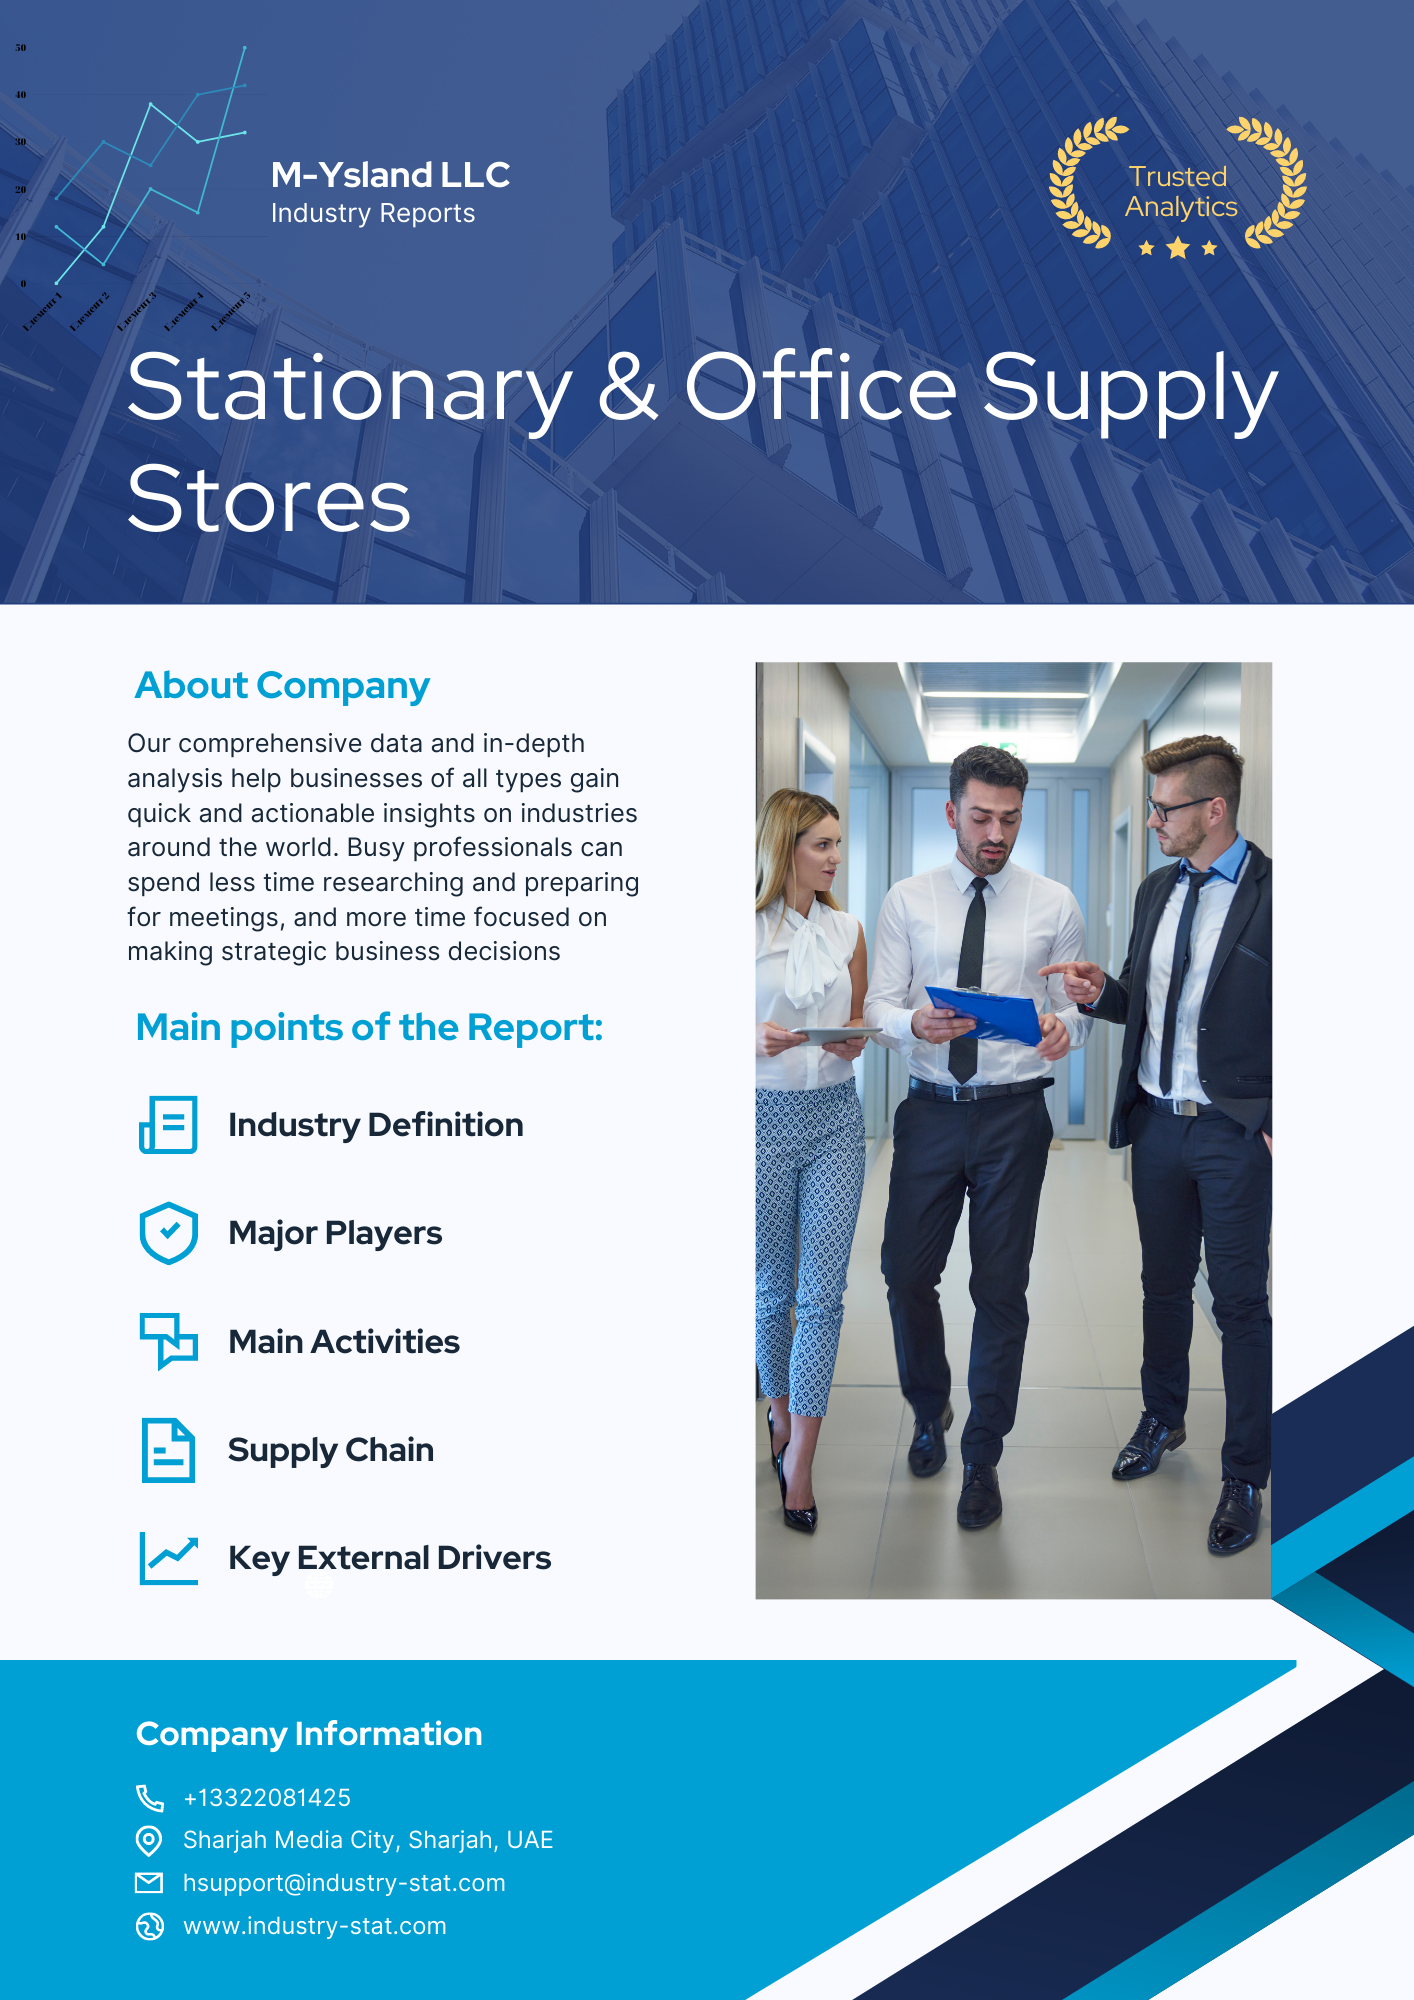 Stationary & Office Supply Stores